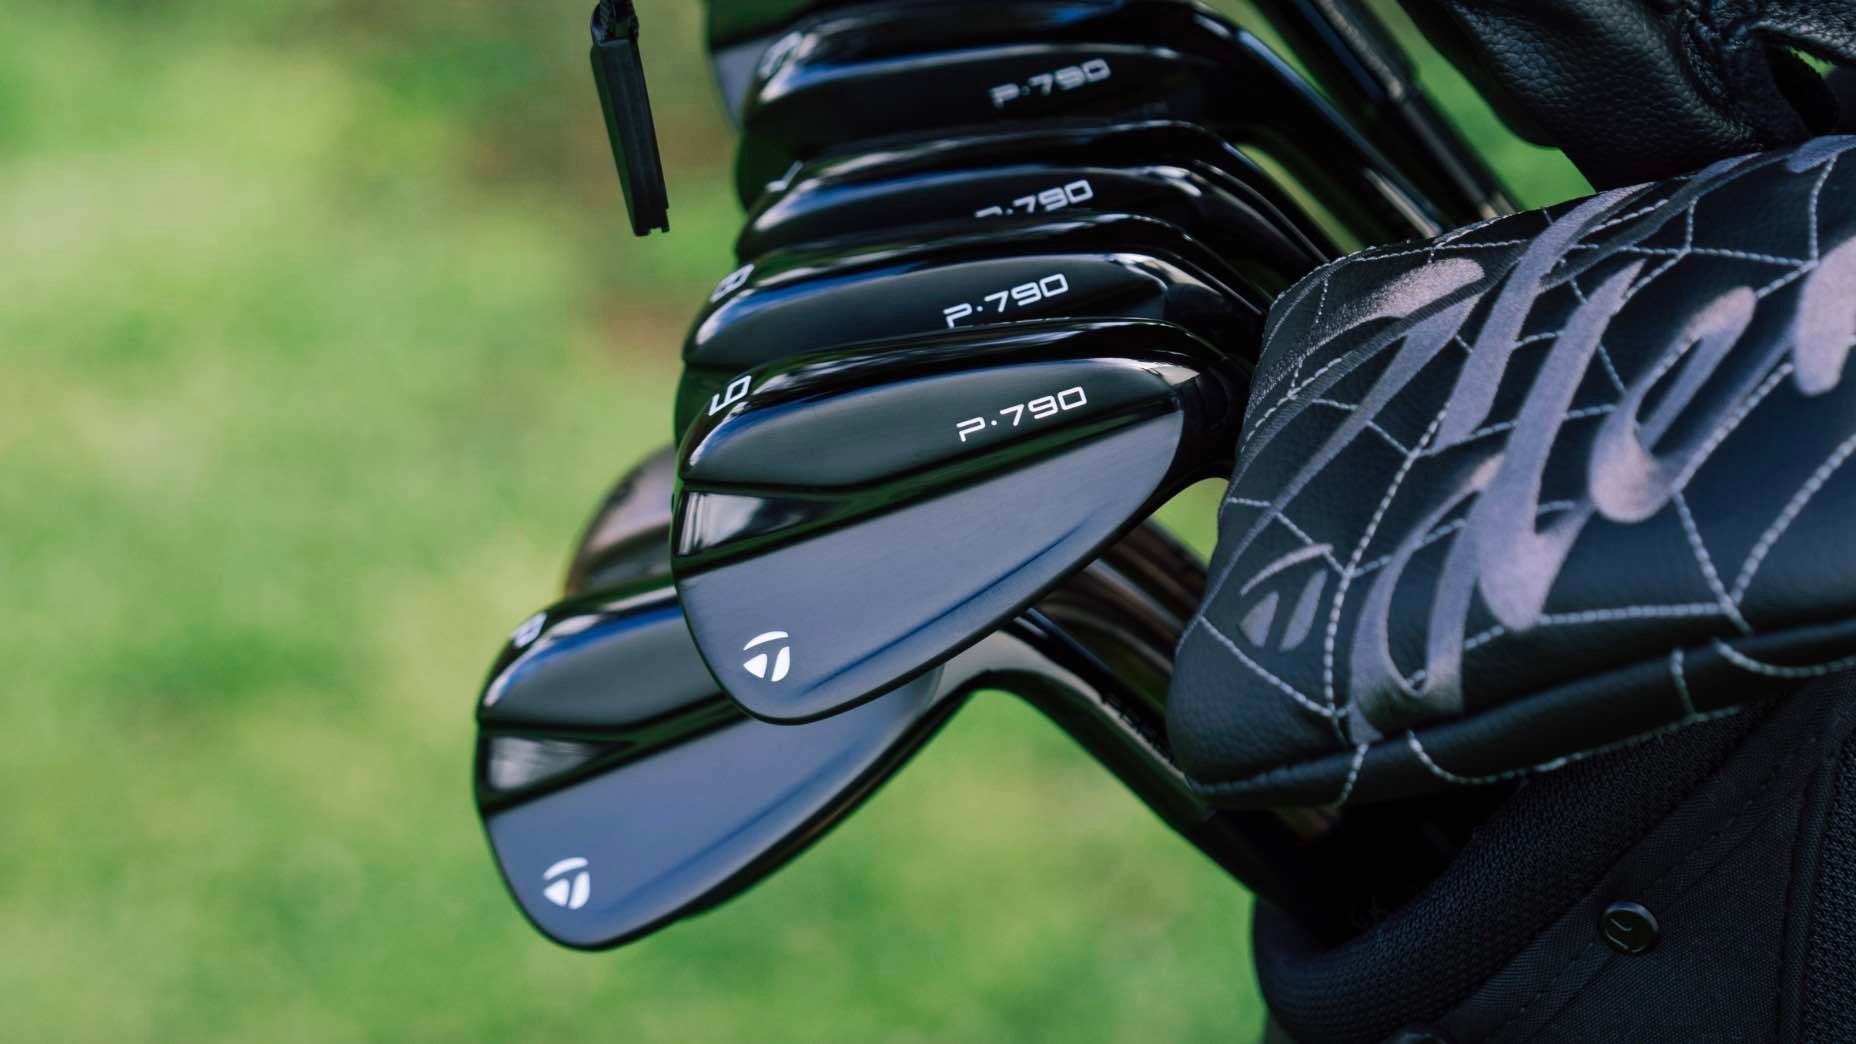 TaylorMade P790 irons with phantom black finish | FIRST LOOK